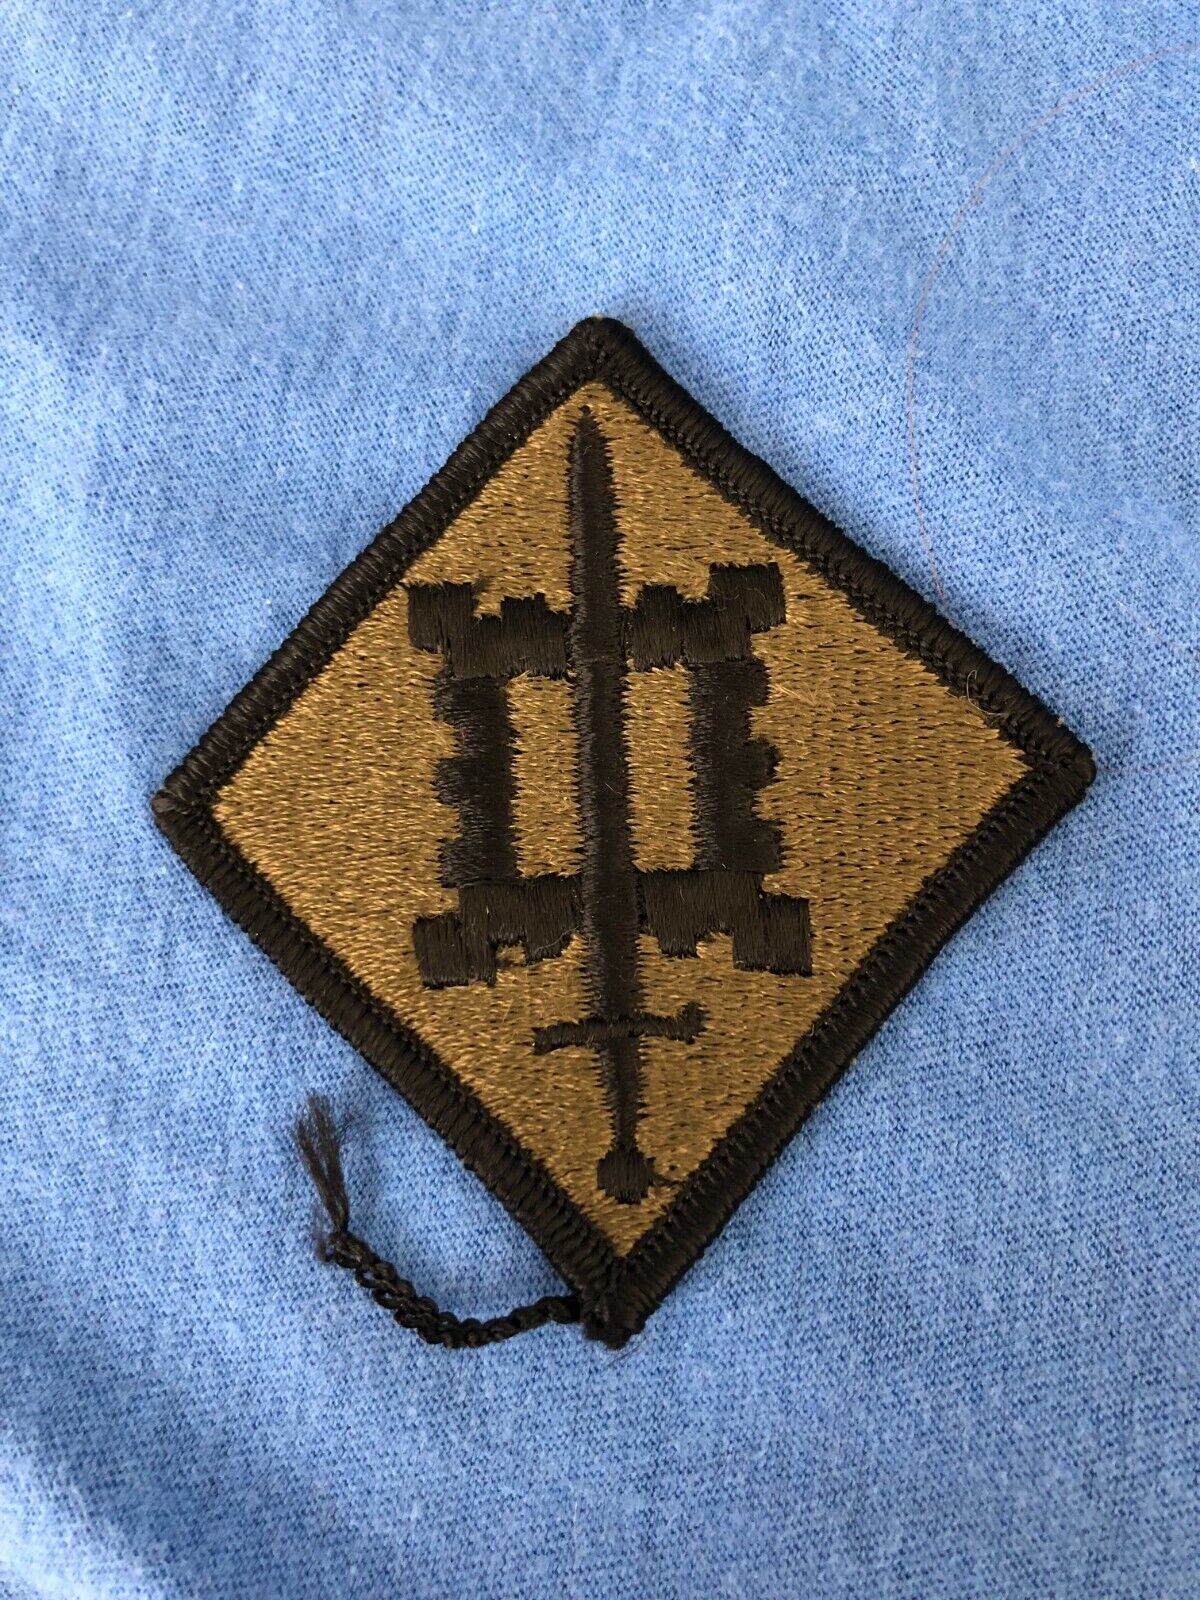 Vintage US Army 18th Engineer Brigade Subdued Uniform Patch Combat Engineering A